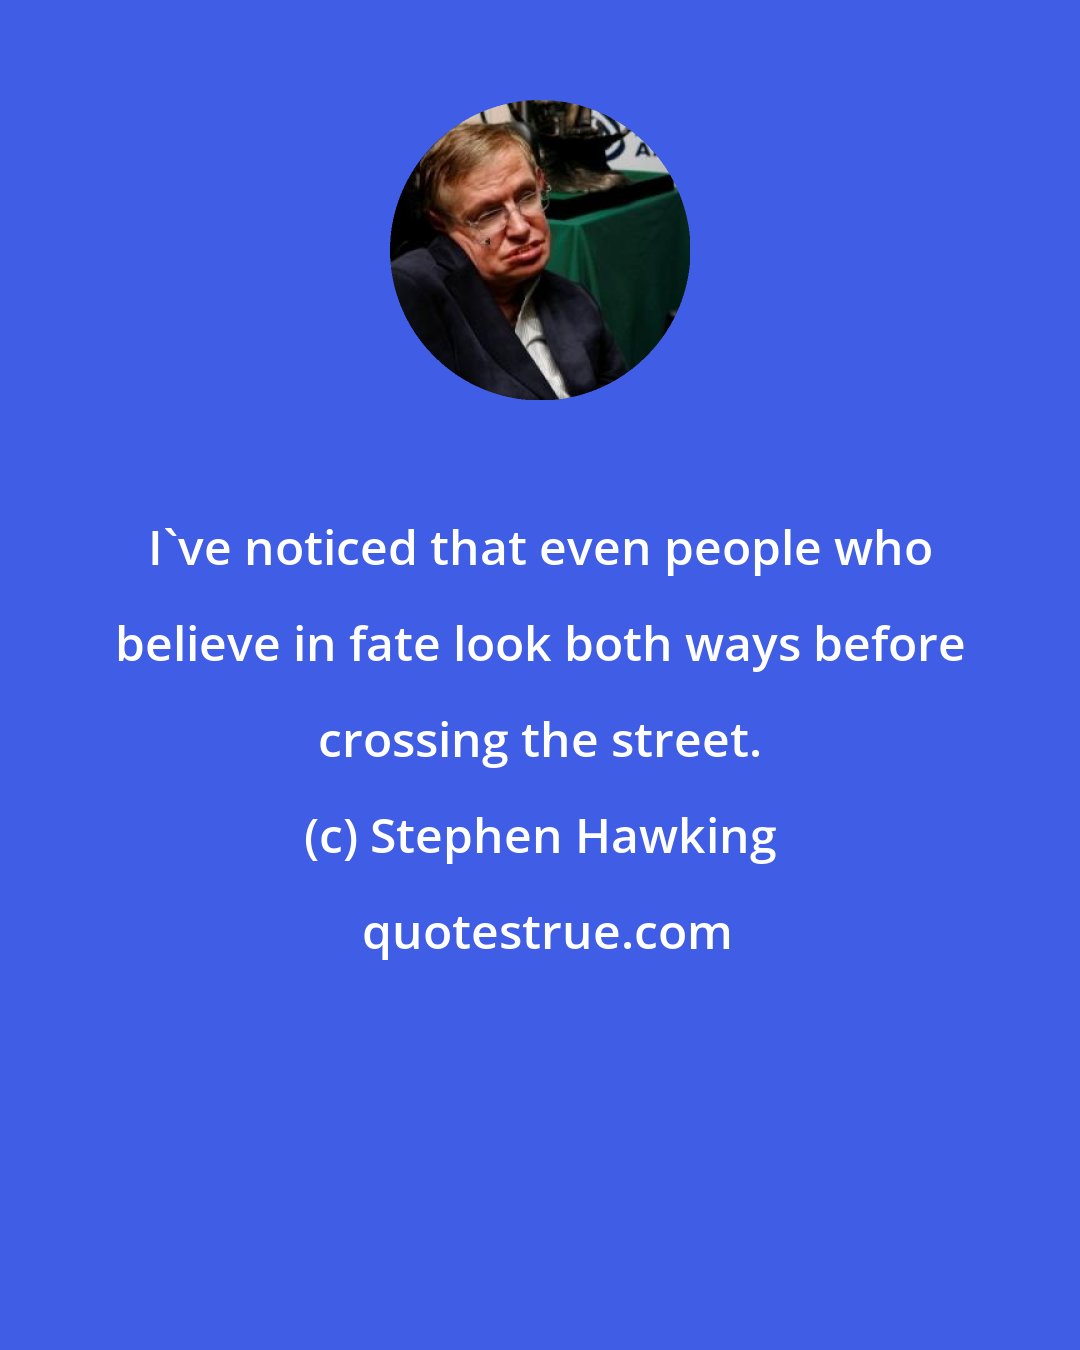 Stephen Hawking: I've noticed that even people who believe in fate look both ways before crossing the street.